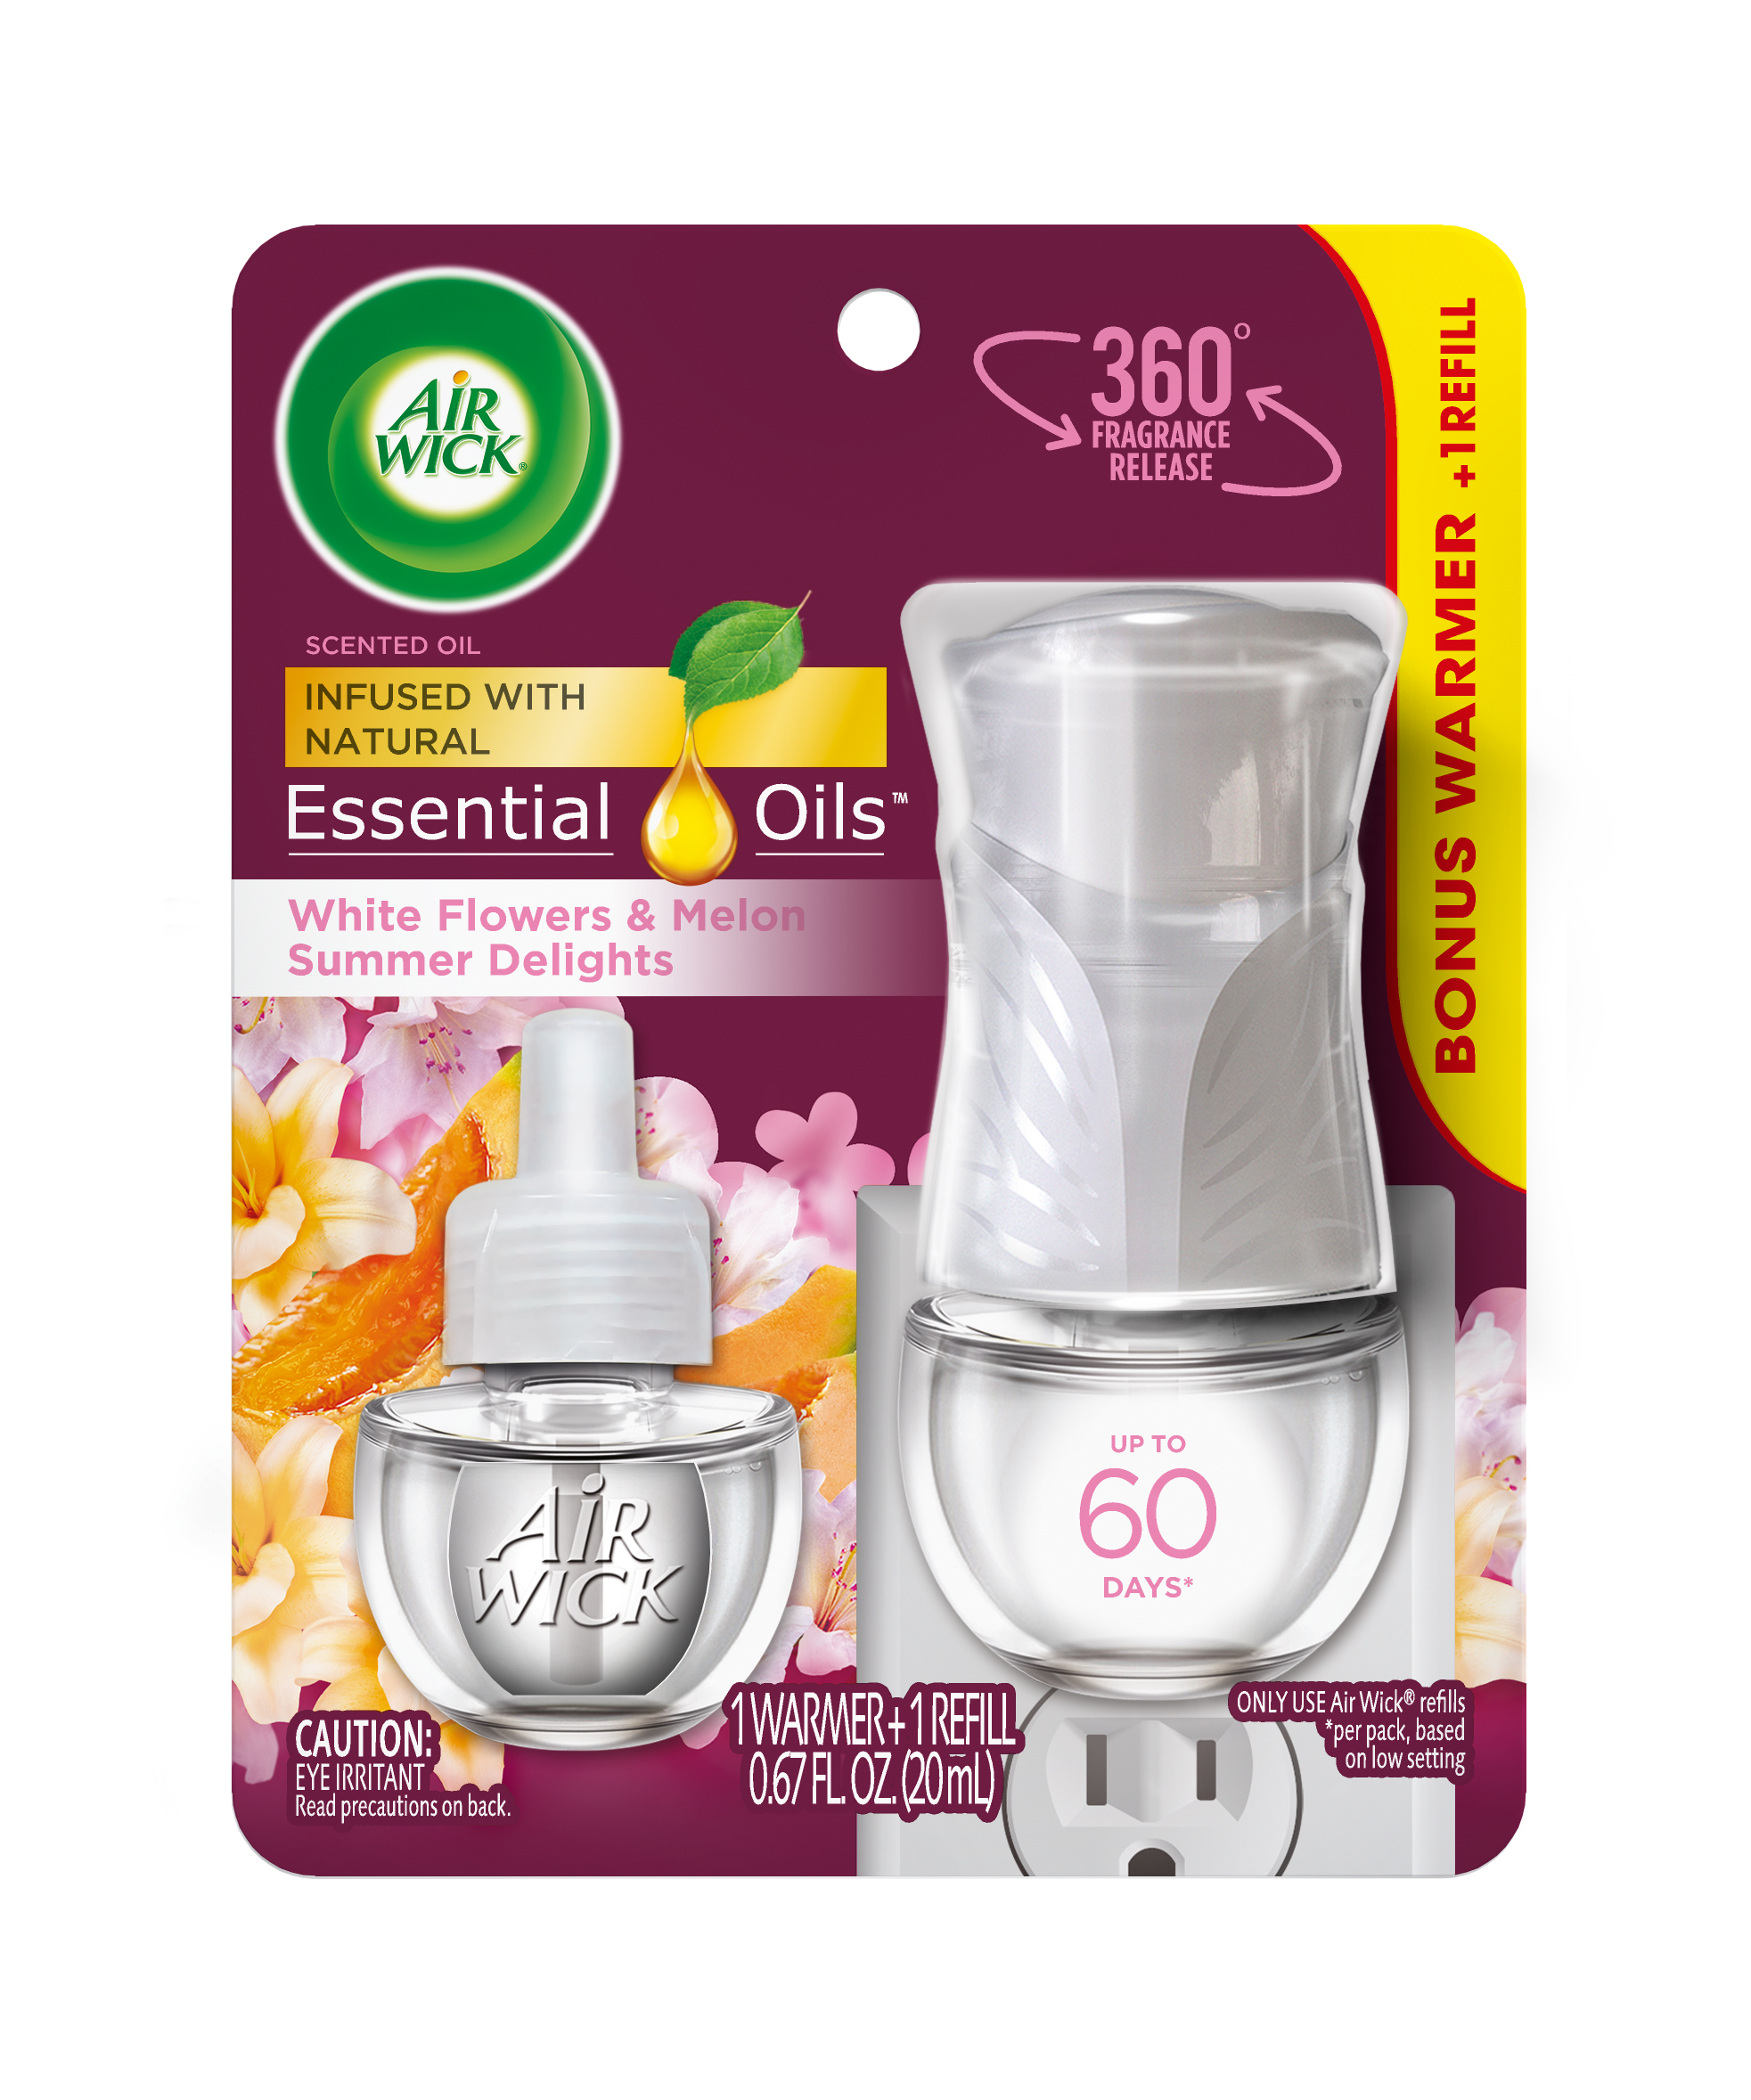 AIR WICK Scented Oil  White Flowers  Melon Summer Delights  Kit